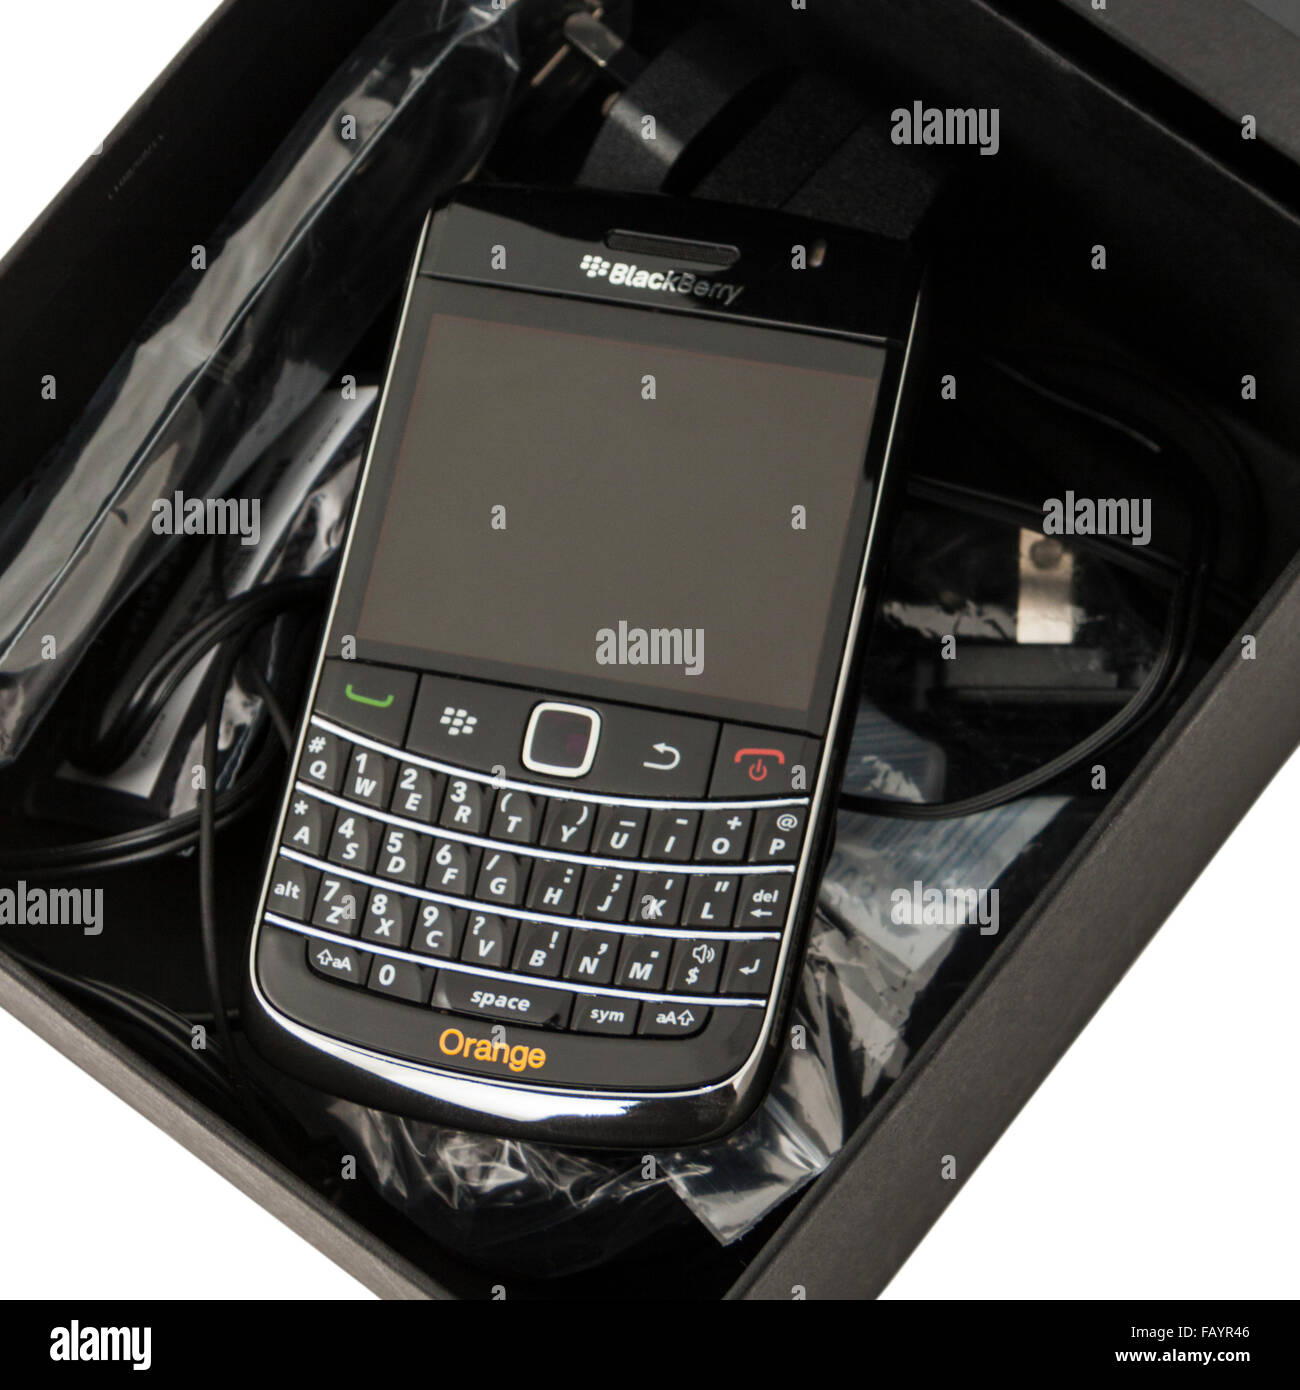 Blackberry Bold 9900 smartphone from 2011 with full physical QWERTY keyboard Stock Photo